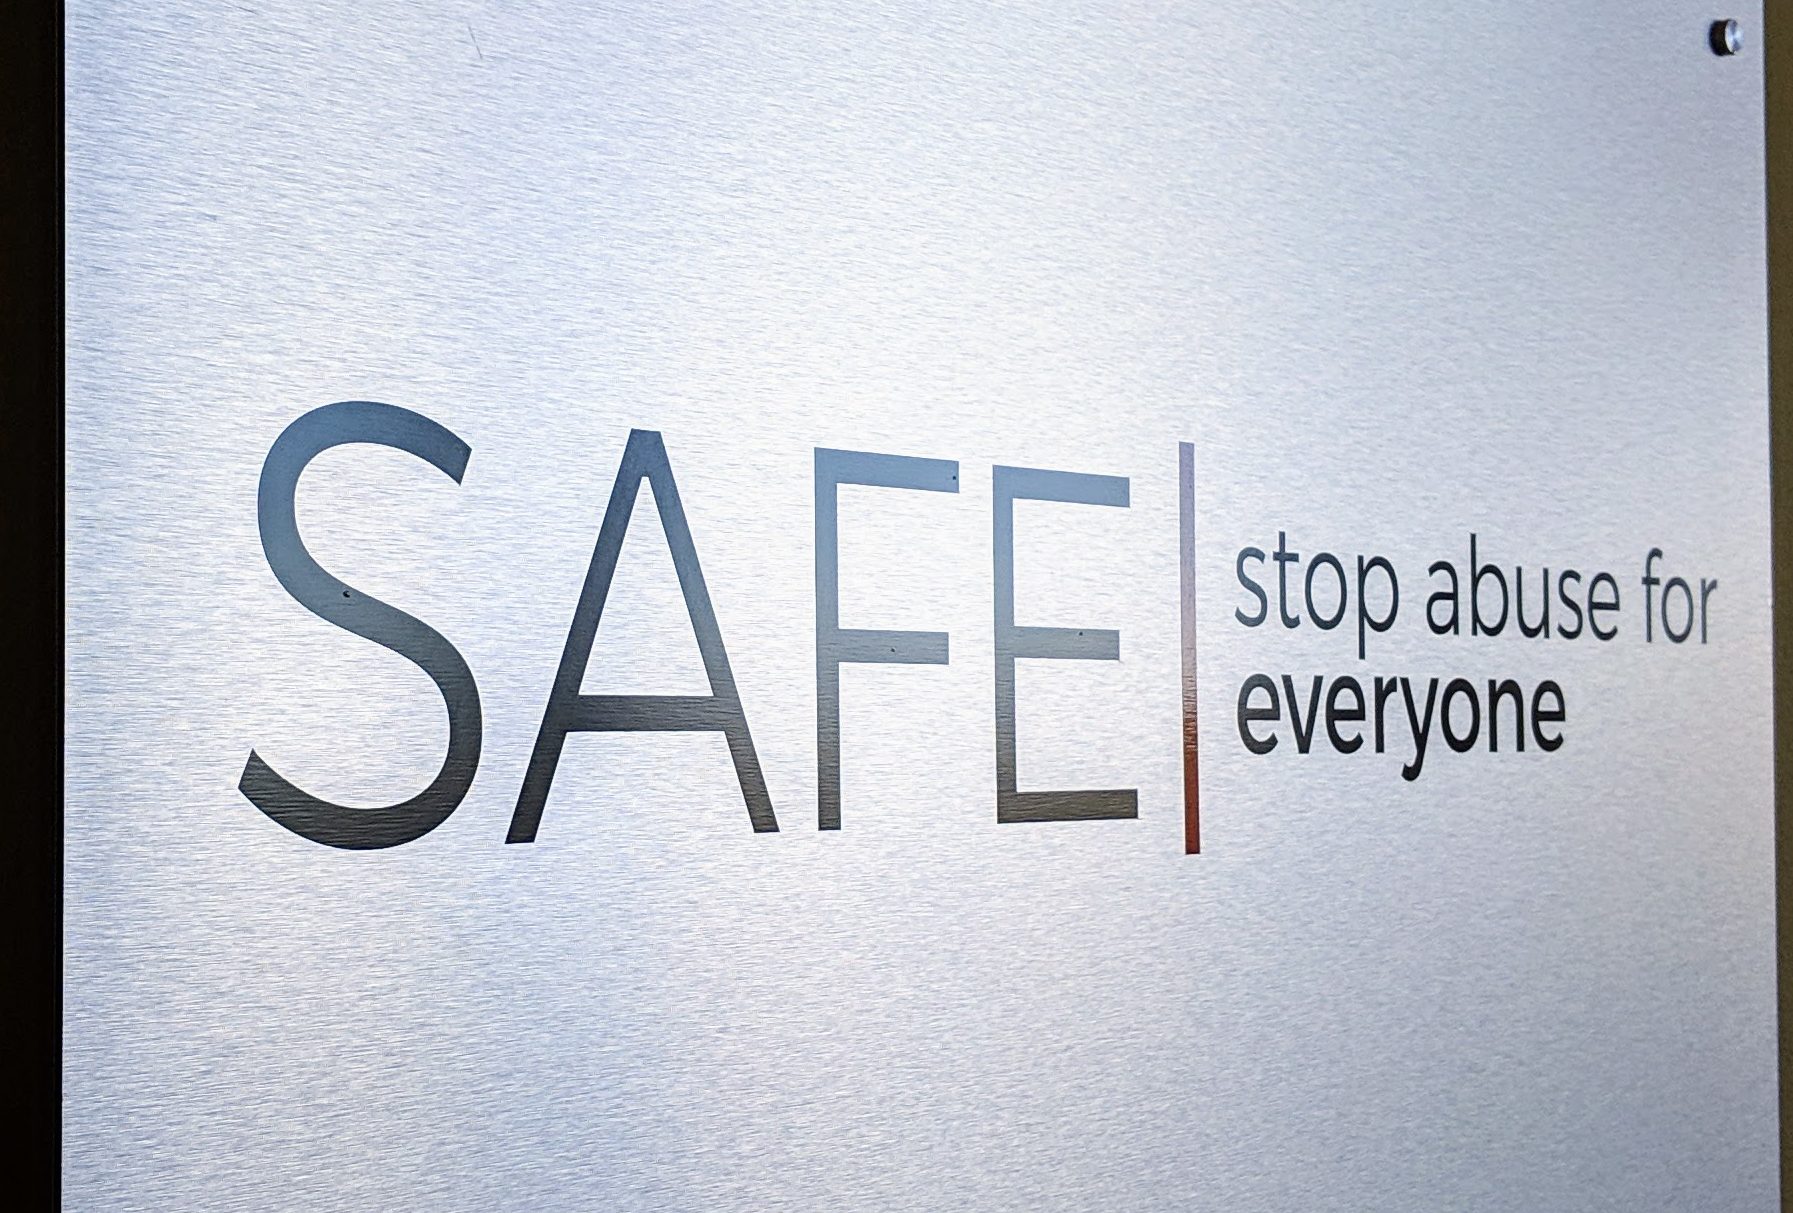 A photo of the SAFE logo printed on a steel panel